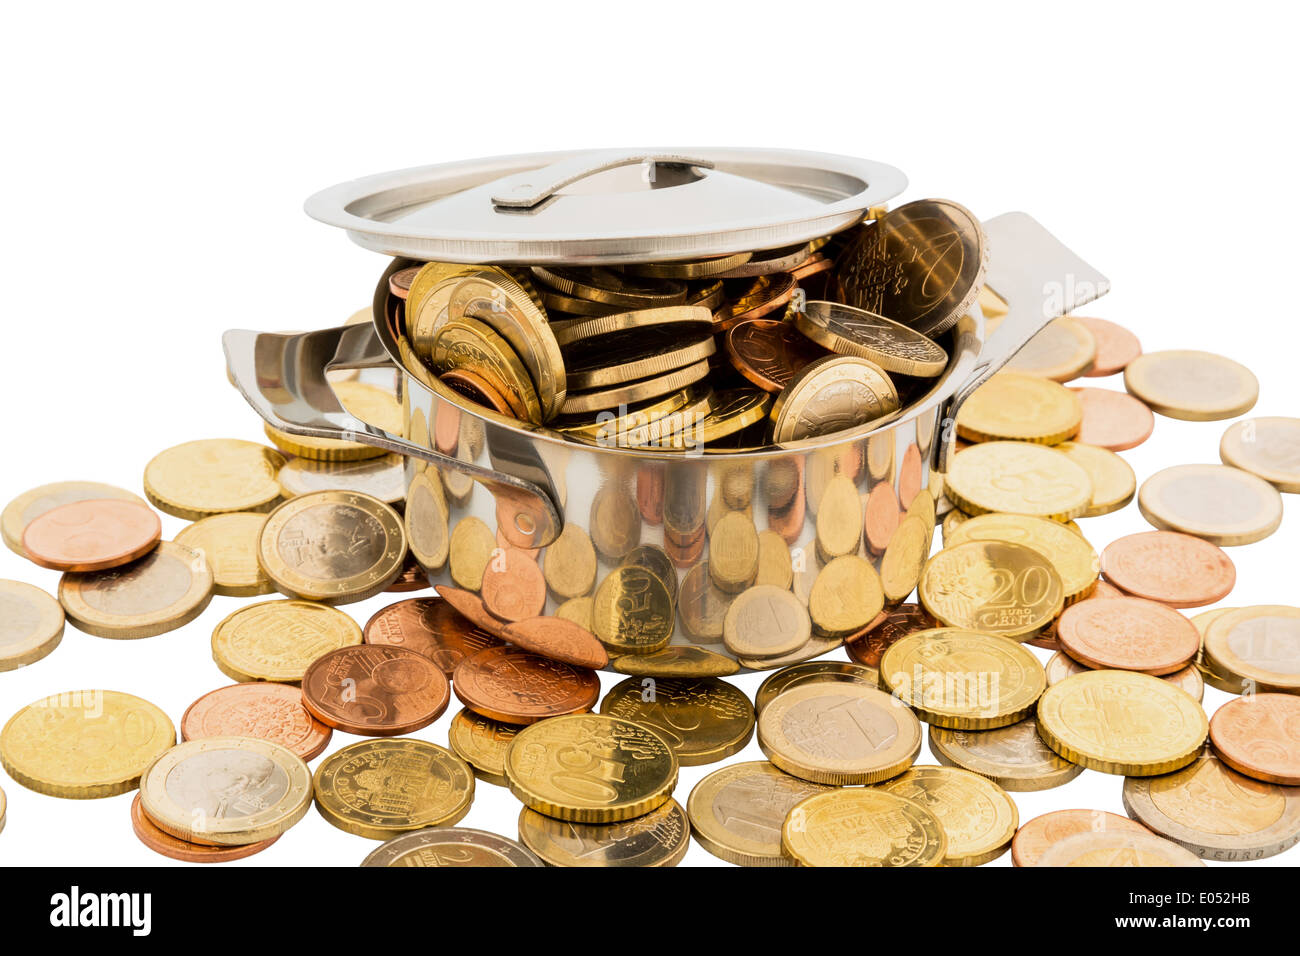 A saucepan is filled with eurocoins, symbolic photo for conveyor money Stock Photo